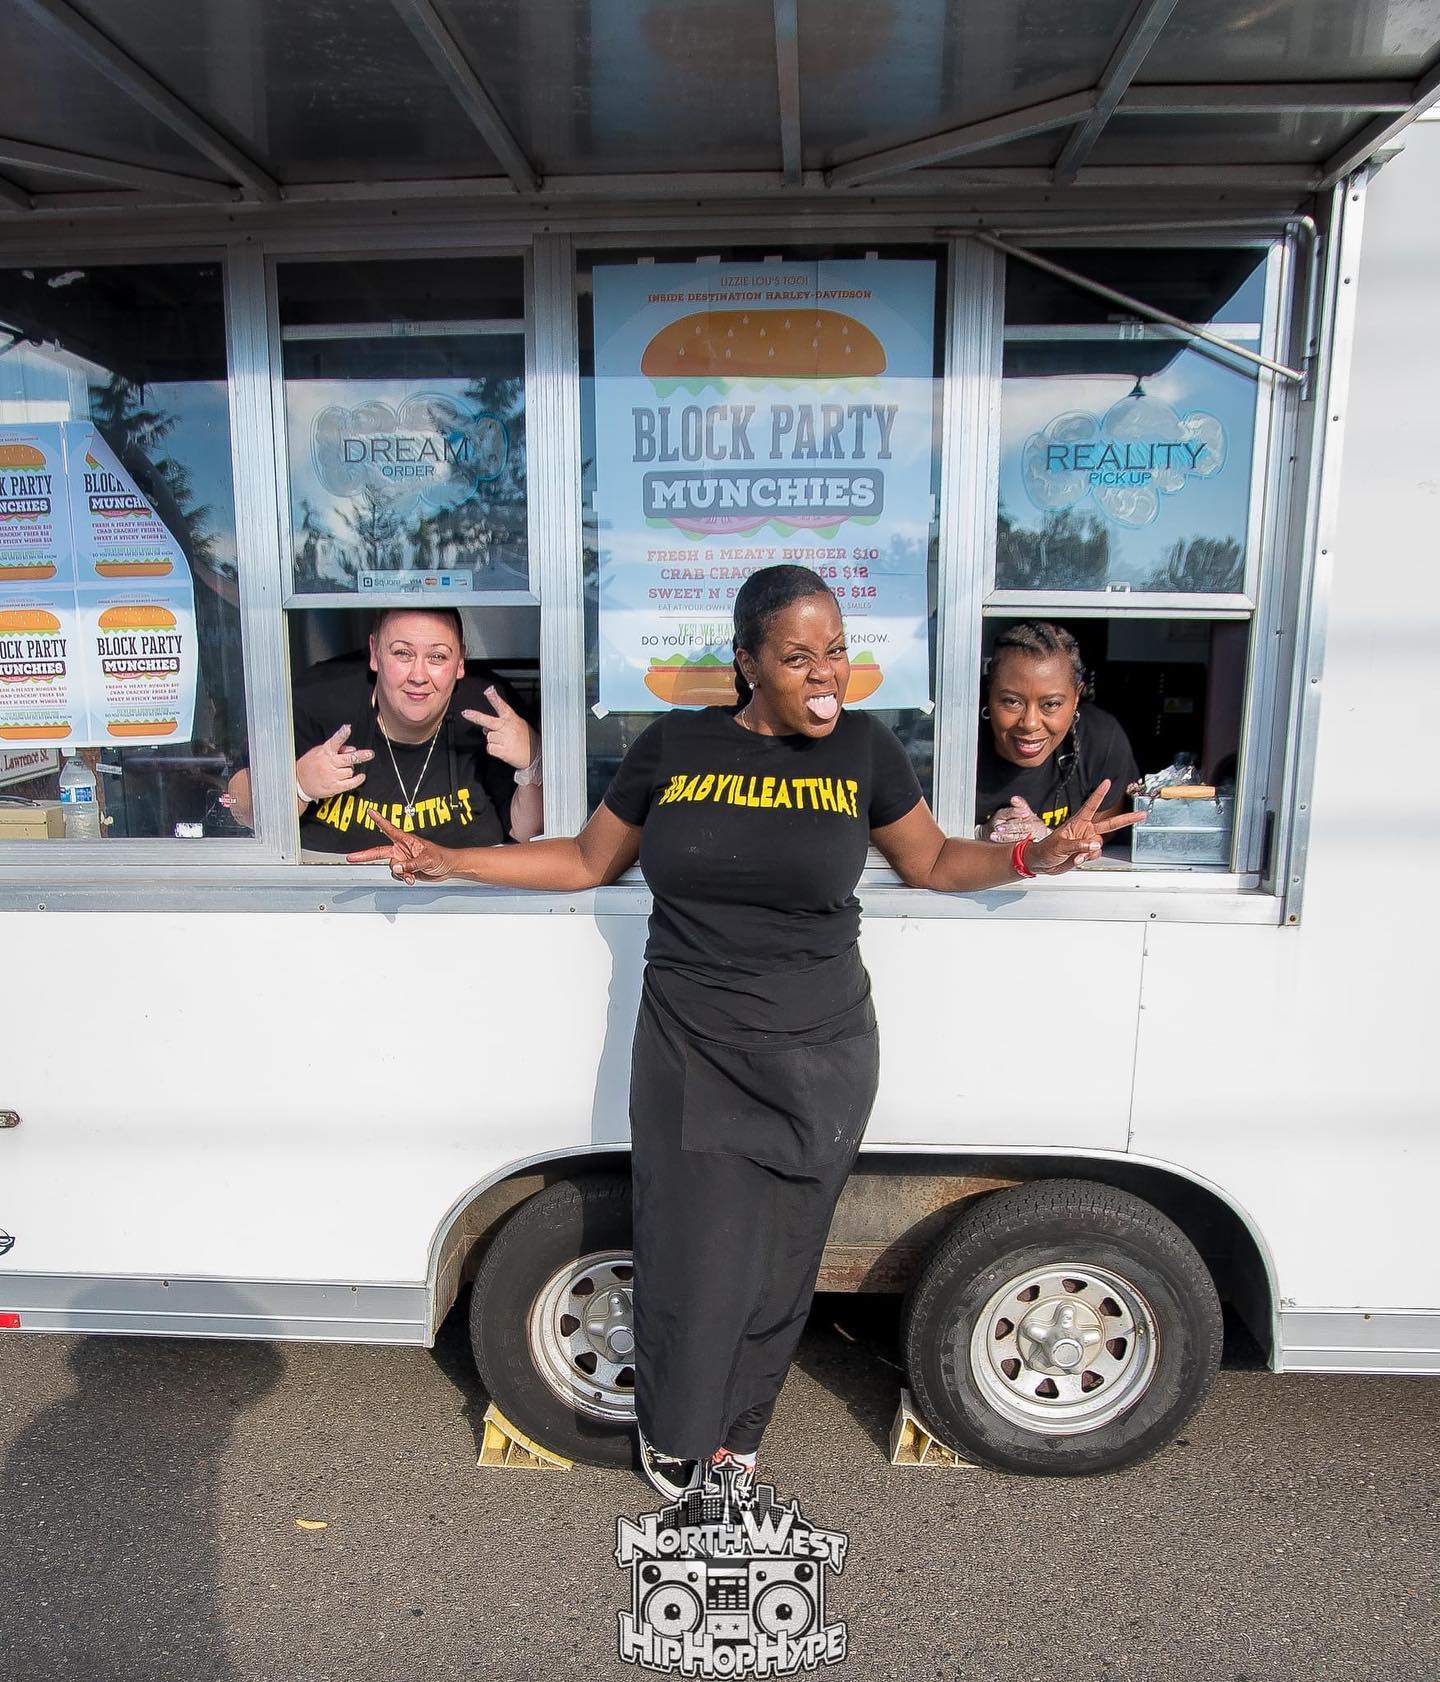 Owner Nessa standing in front of her food truck, Lizzie Lou's, with her cooks looking out of the windows